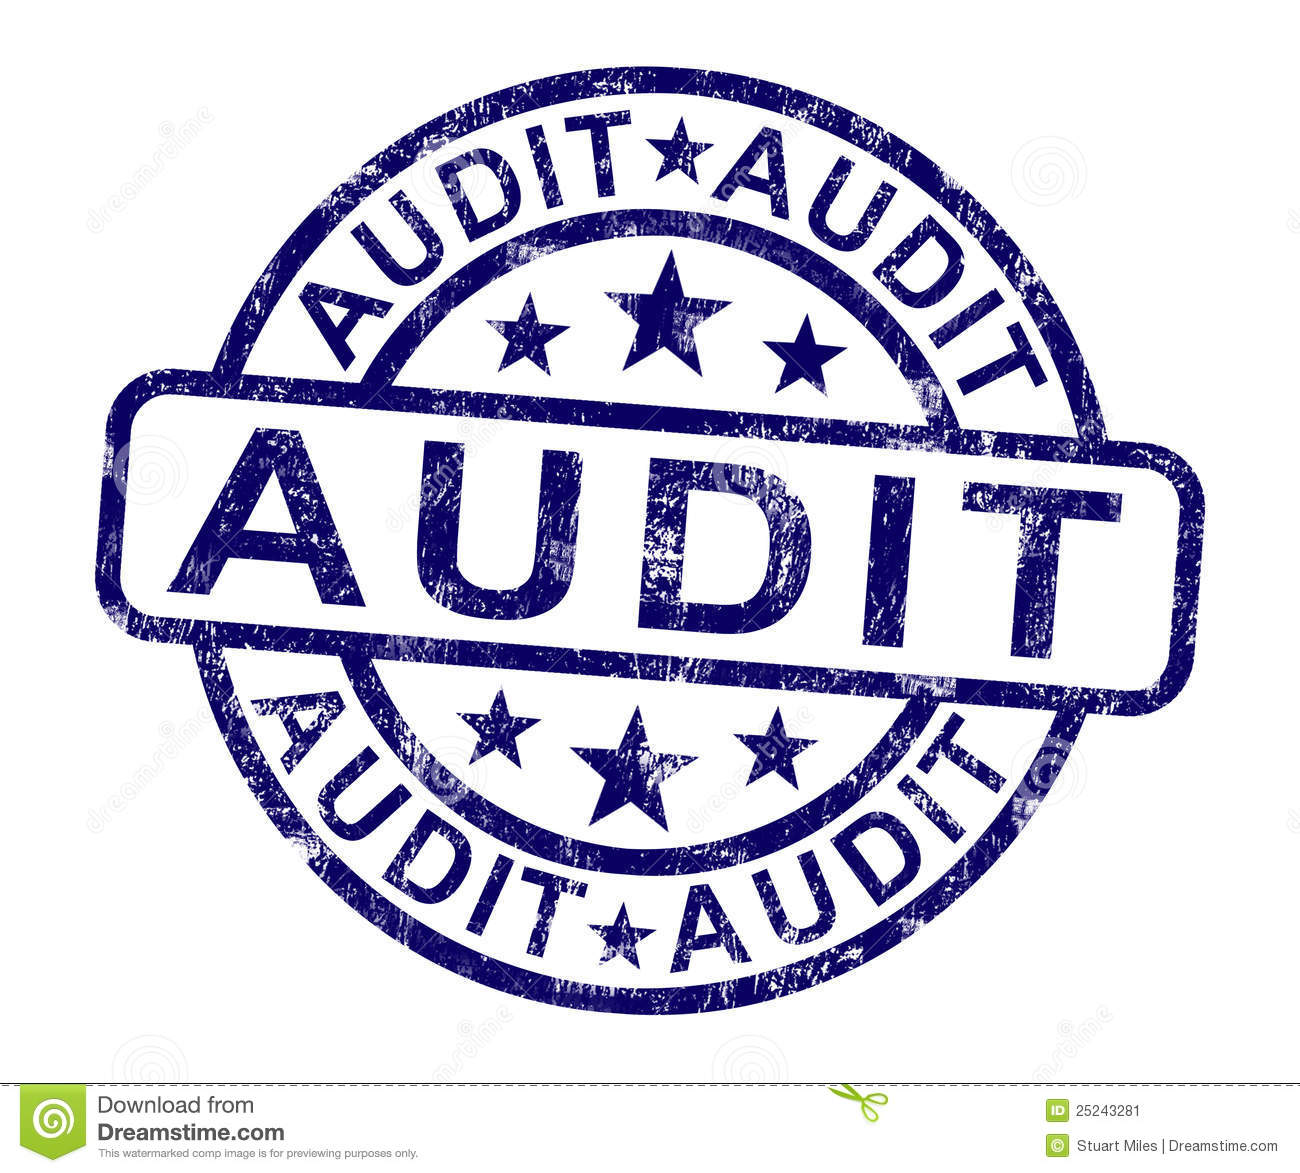 Accountant auditor